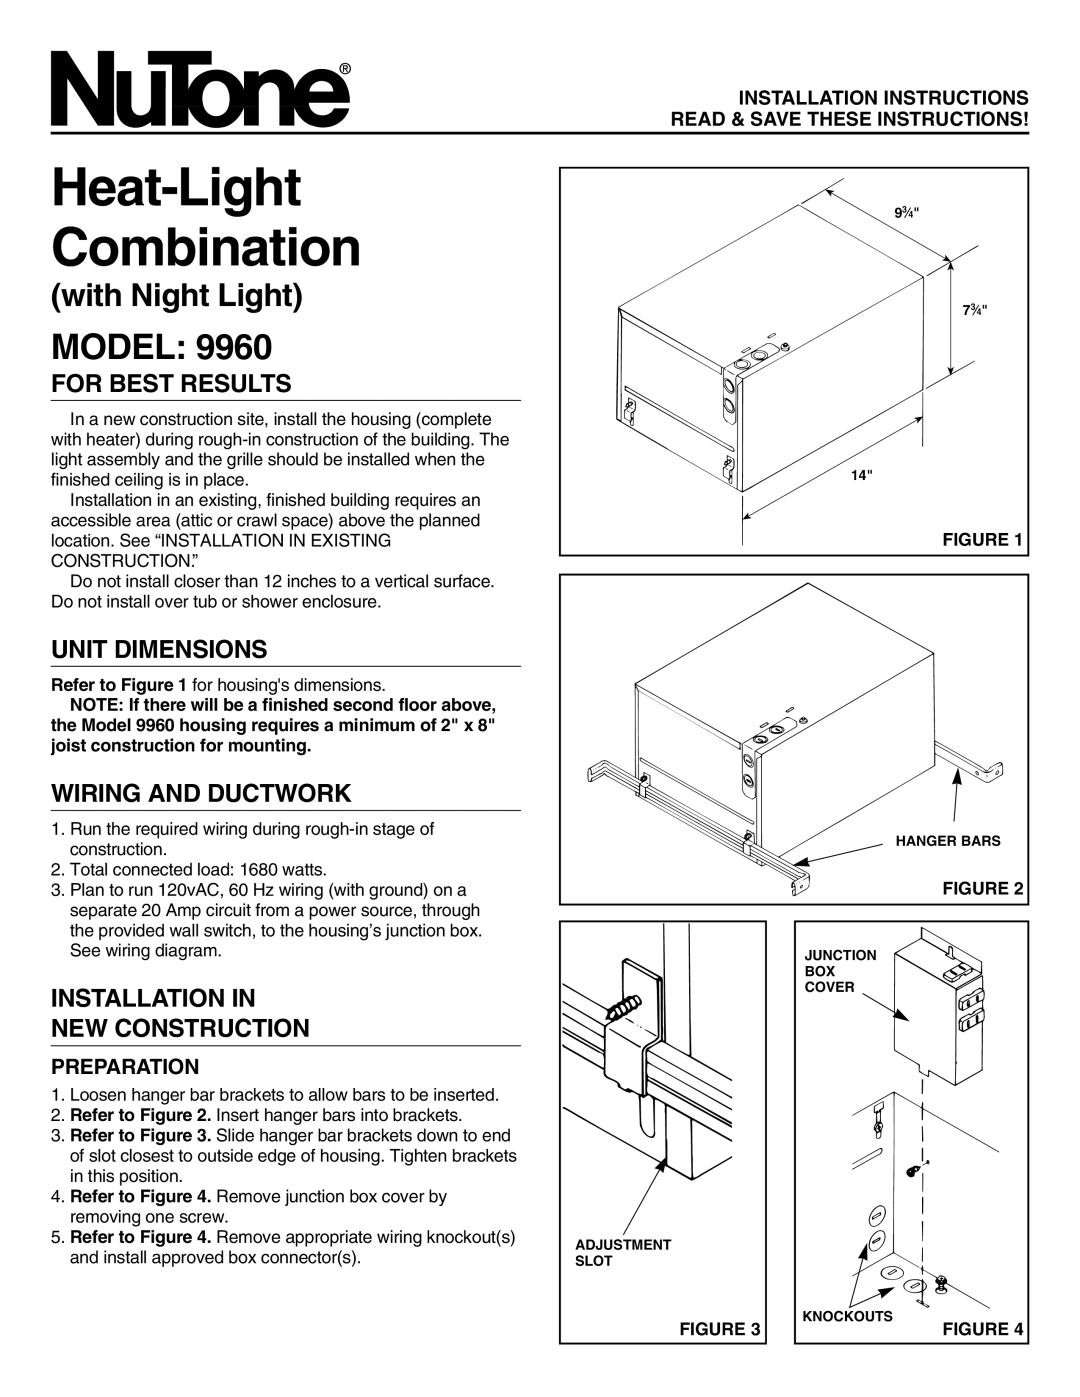 NuTone 9960 installation instructions For Best Results, Unit Dimensions, Wiring And Ductwork, Preparation, Model 